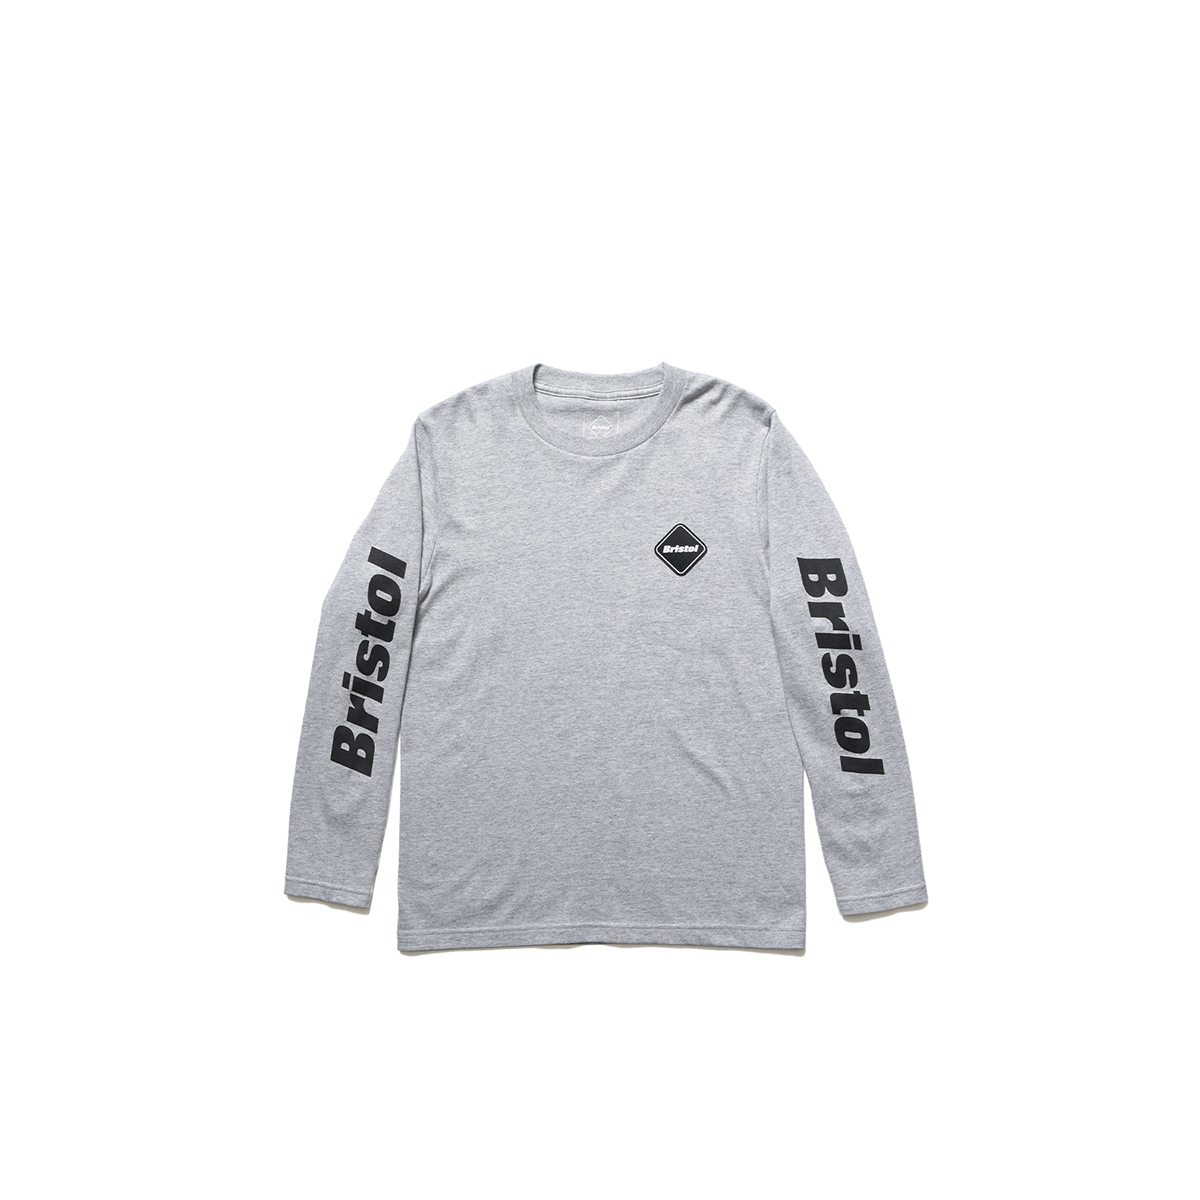 FCRB KIDS AUTHENTIC LOGO L/S TEE